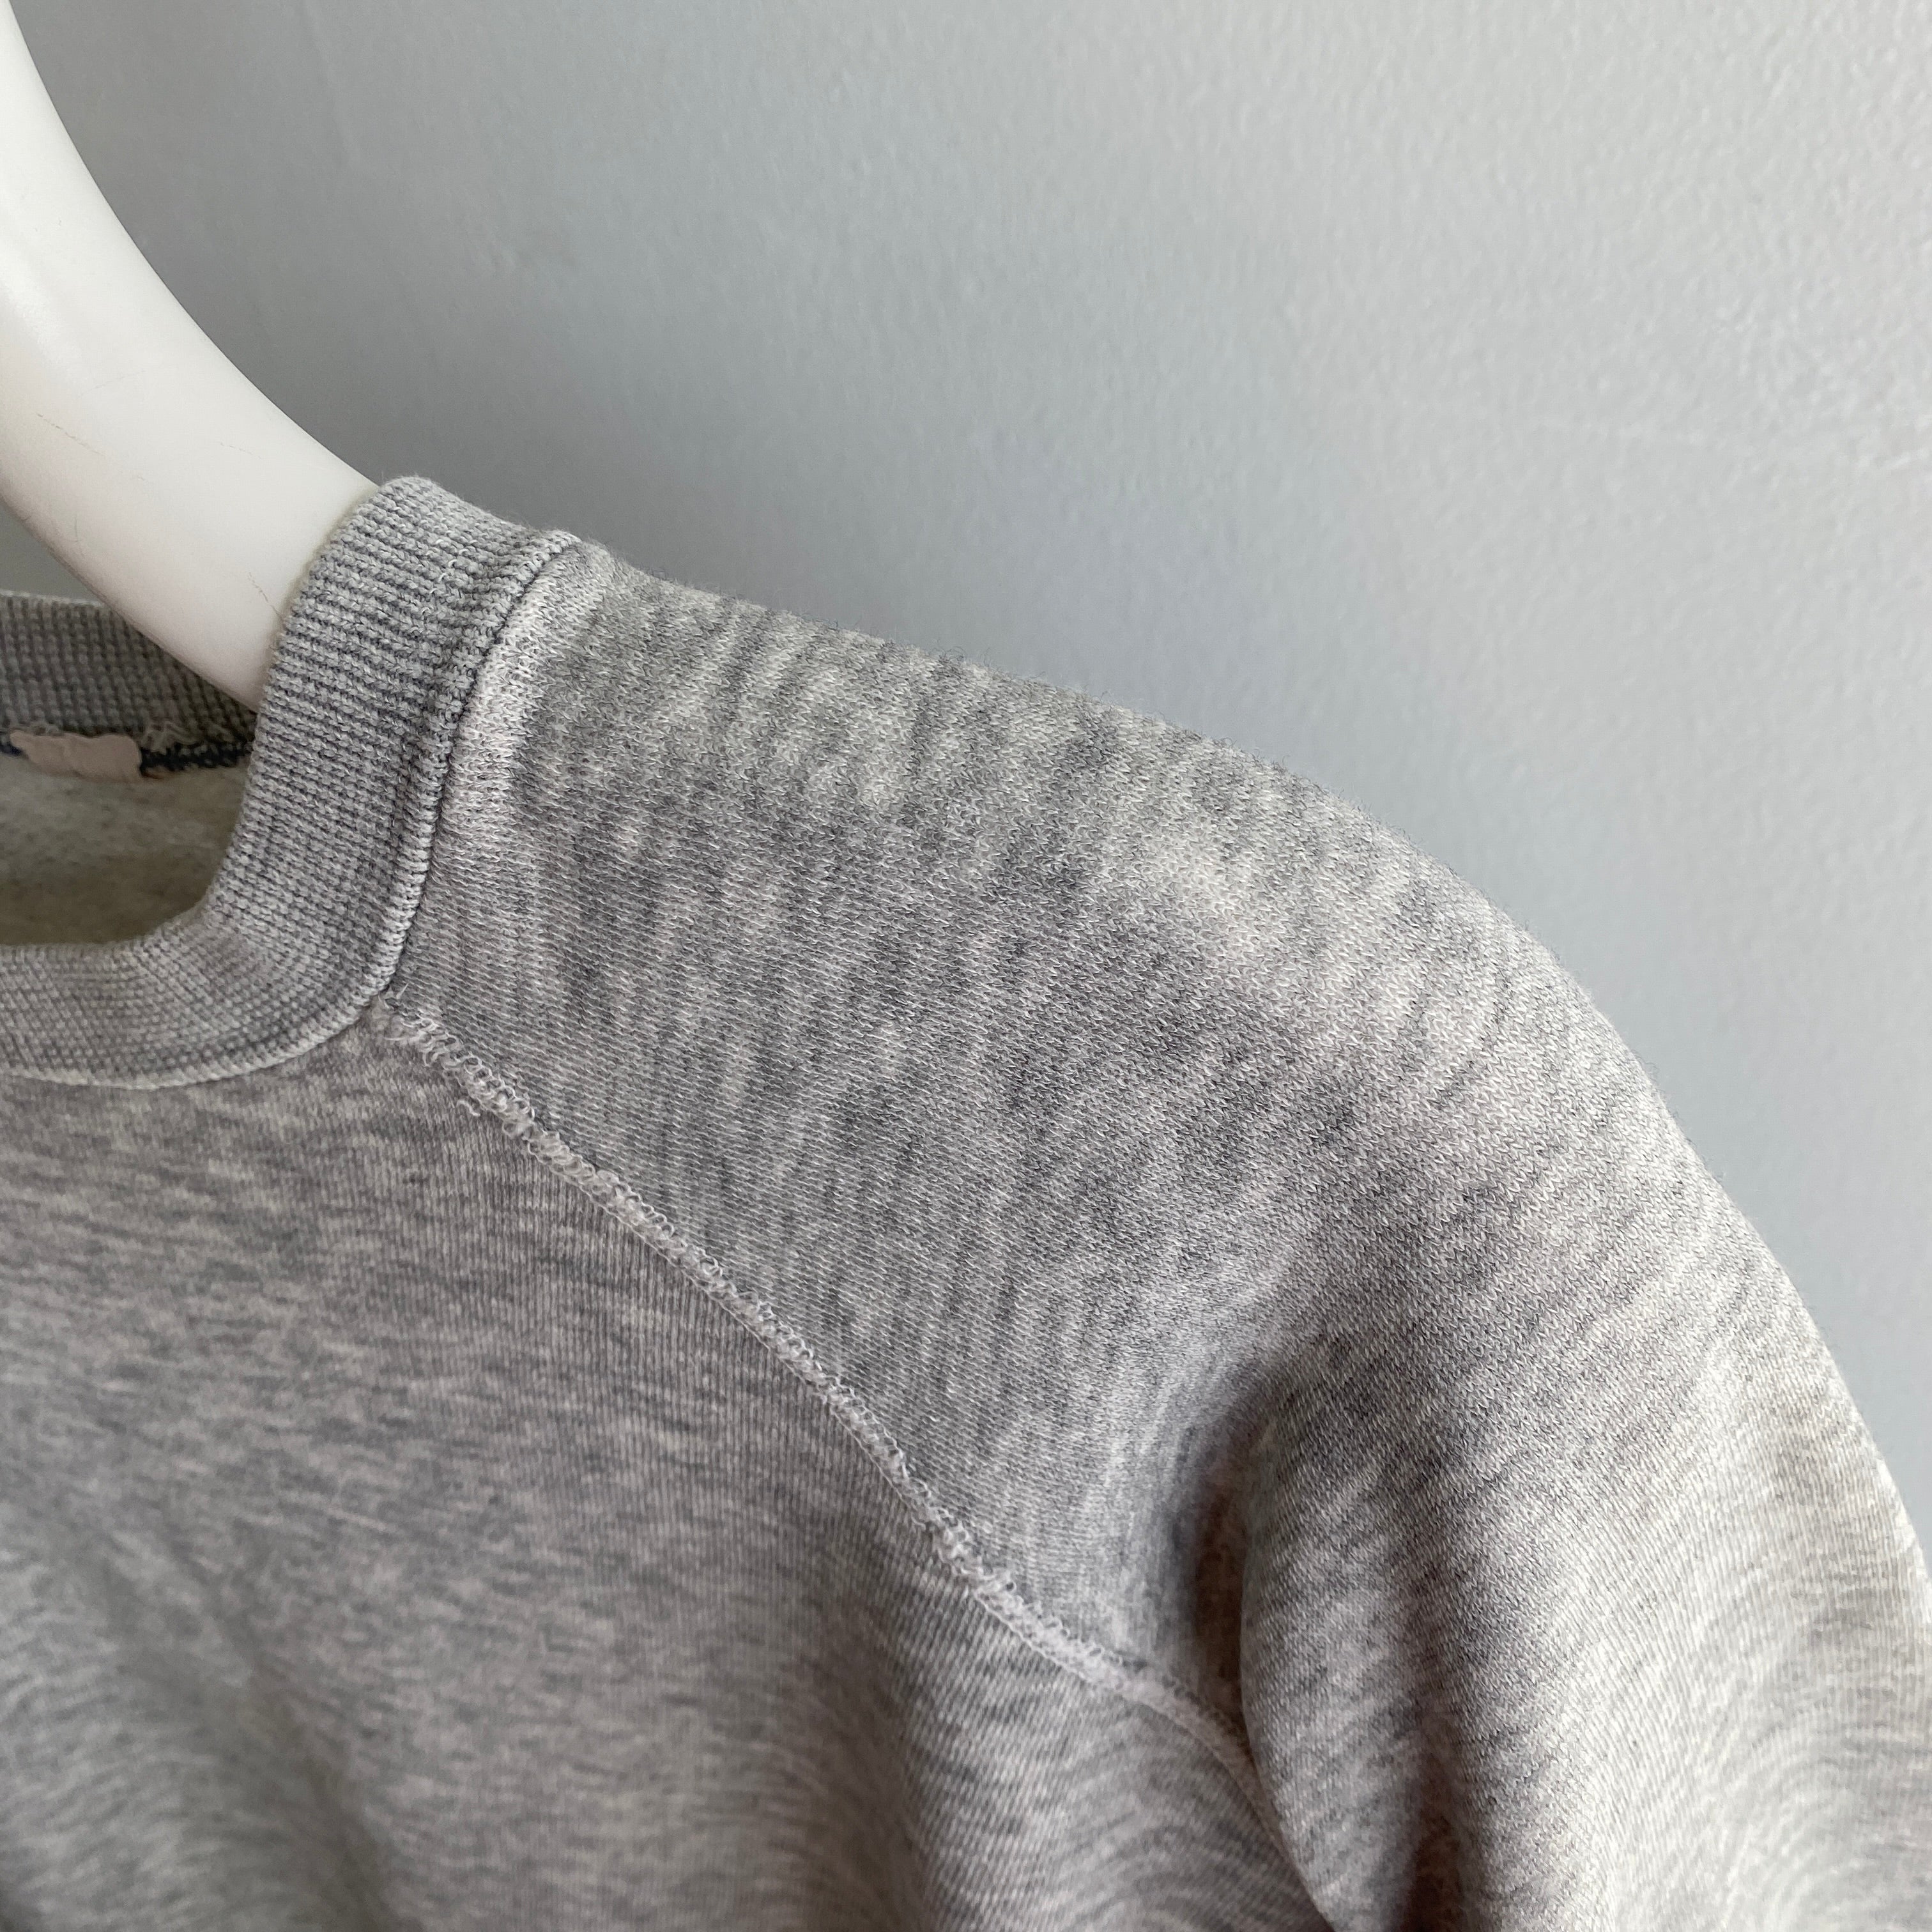 1970/80s Super Thrashed Mended Paper Thin Blank Gray Sweatshirt